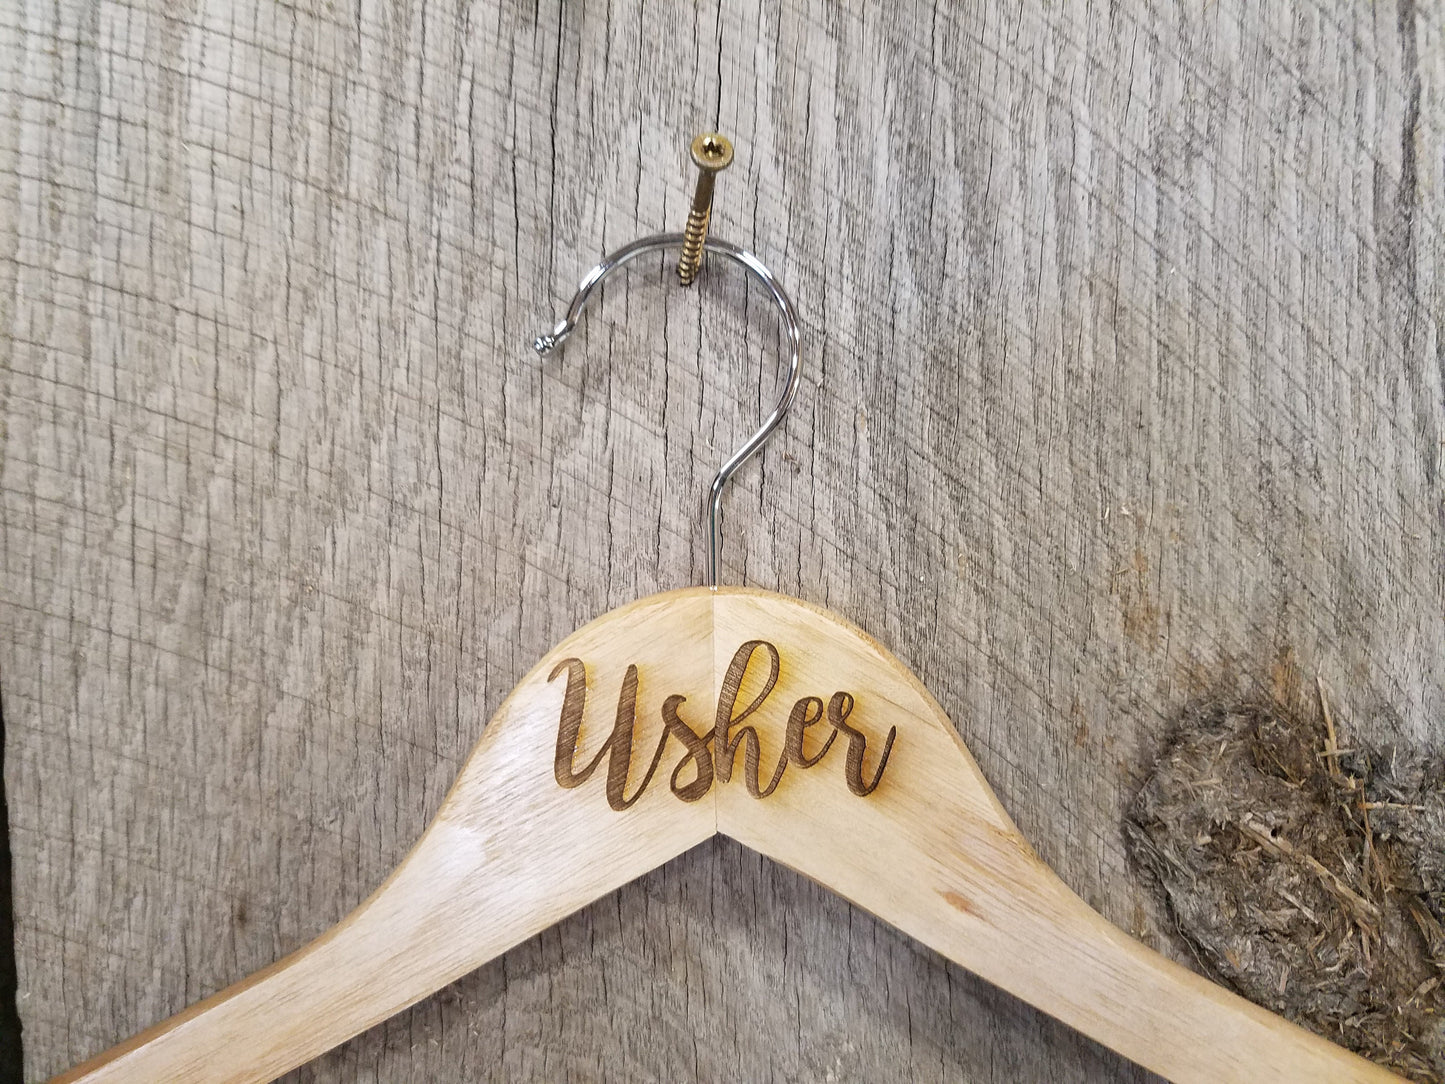 Usher Attendant Bridal Party Engraved Hard Wood Hanger Clothes Coat Sturdy Gift Wedding Bromellow Personalized